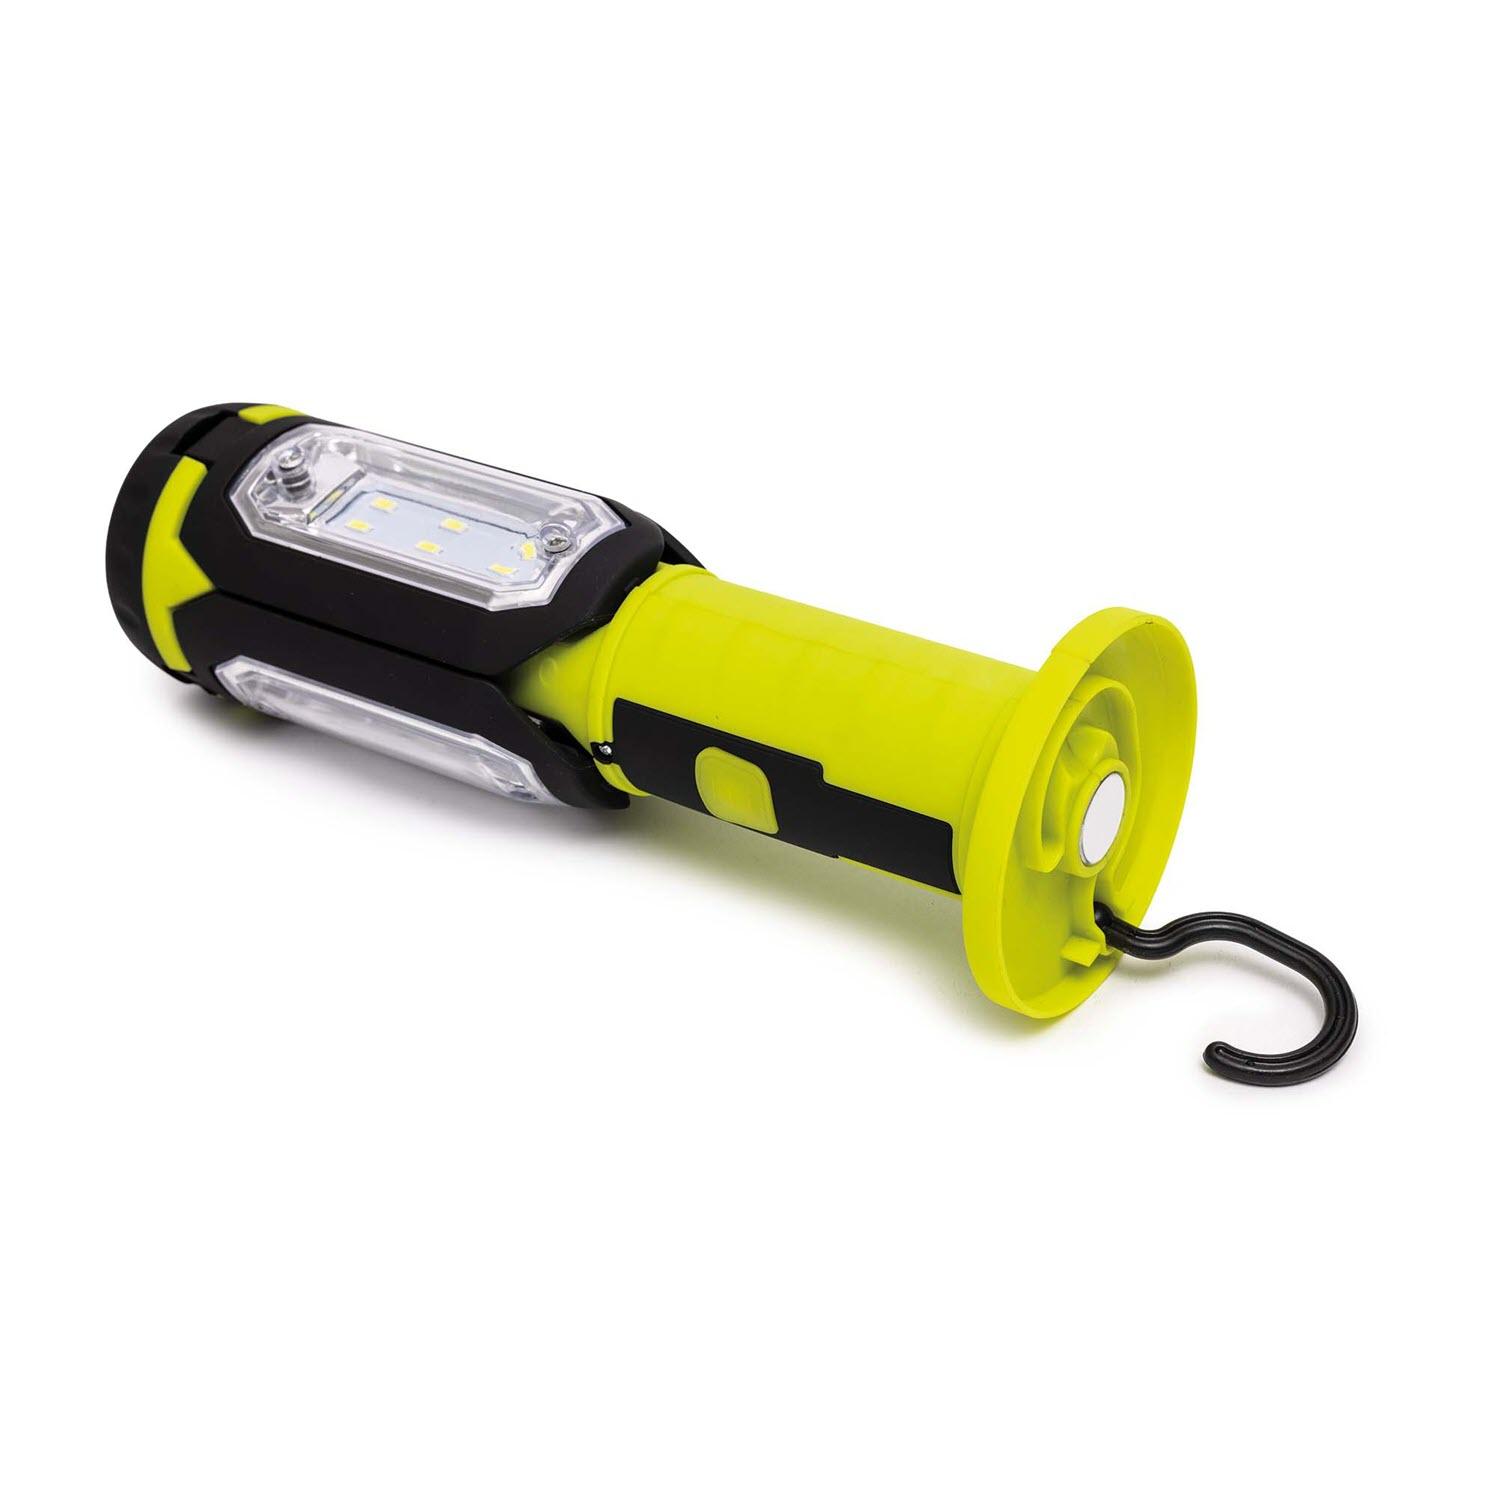 just pump the hand grip! no batteries required One supplied Animal Eco Torch 